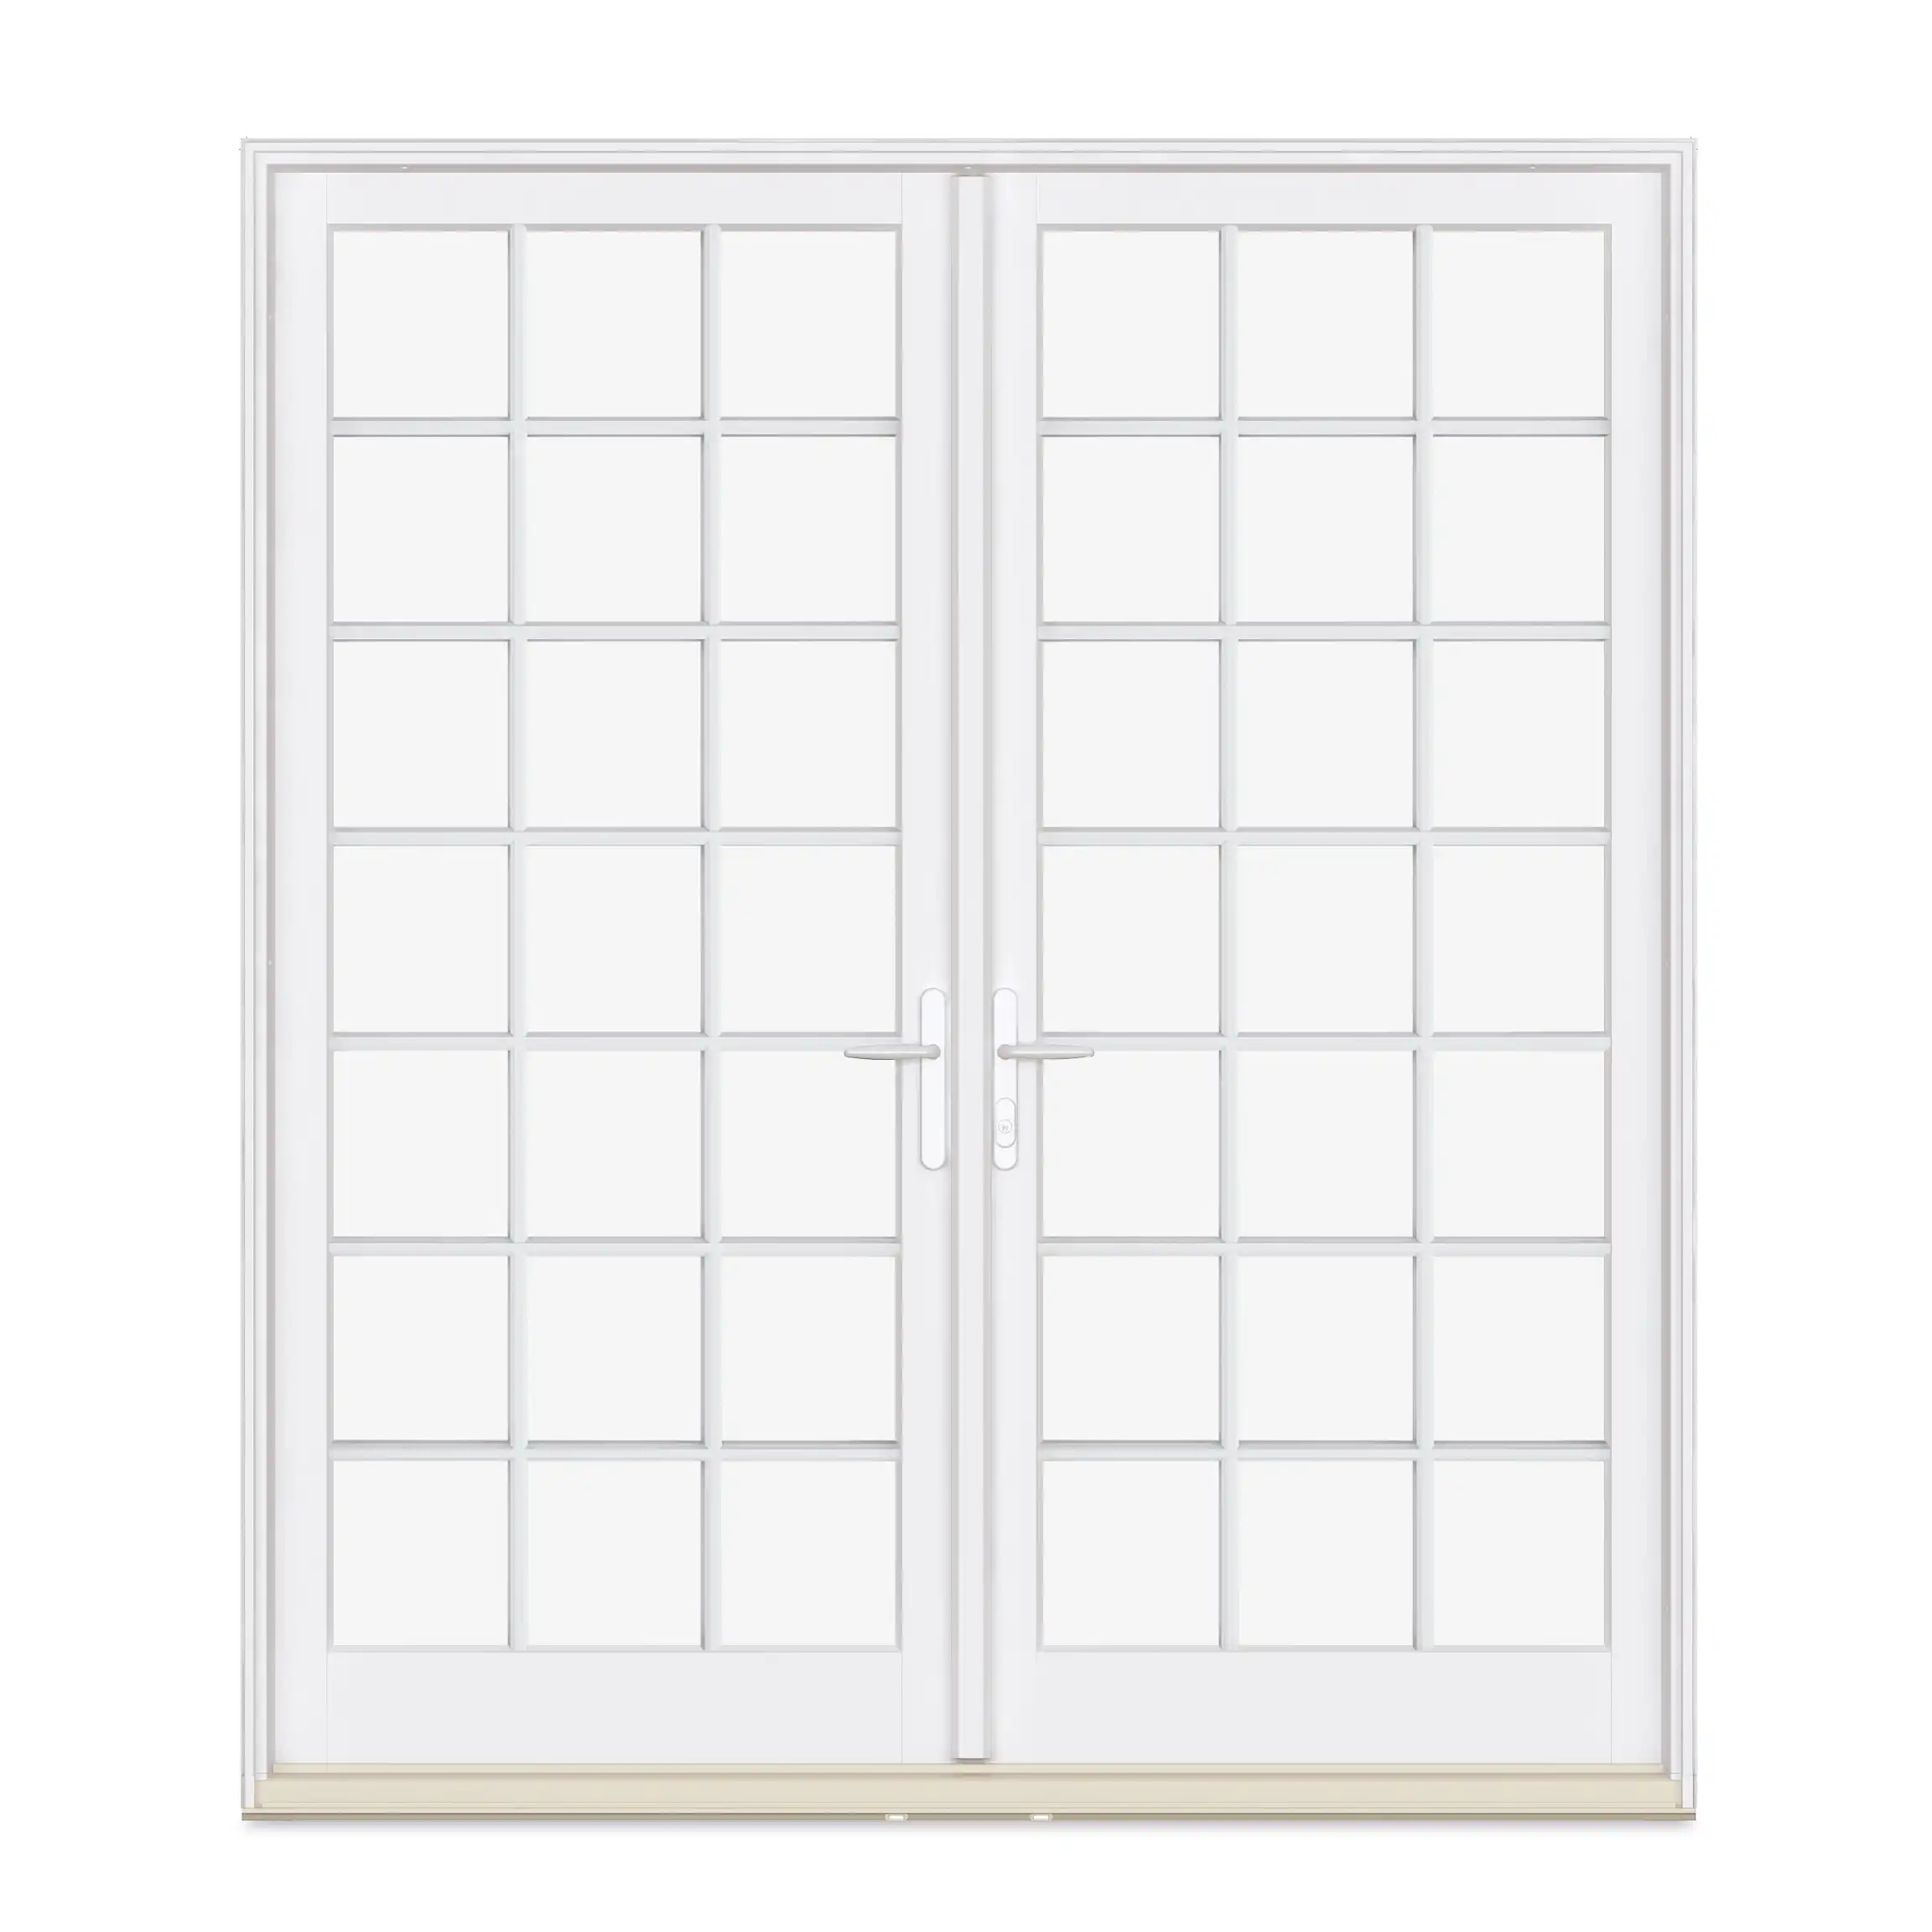 A white two-panel Marvin Replacement Inswing French door with Standard Divided Lites and Northfield style door handle.